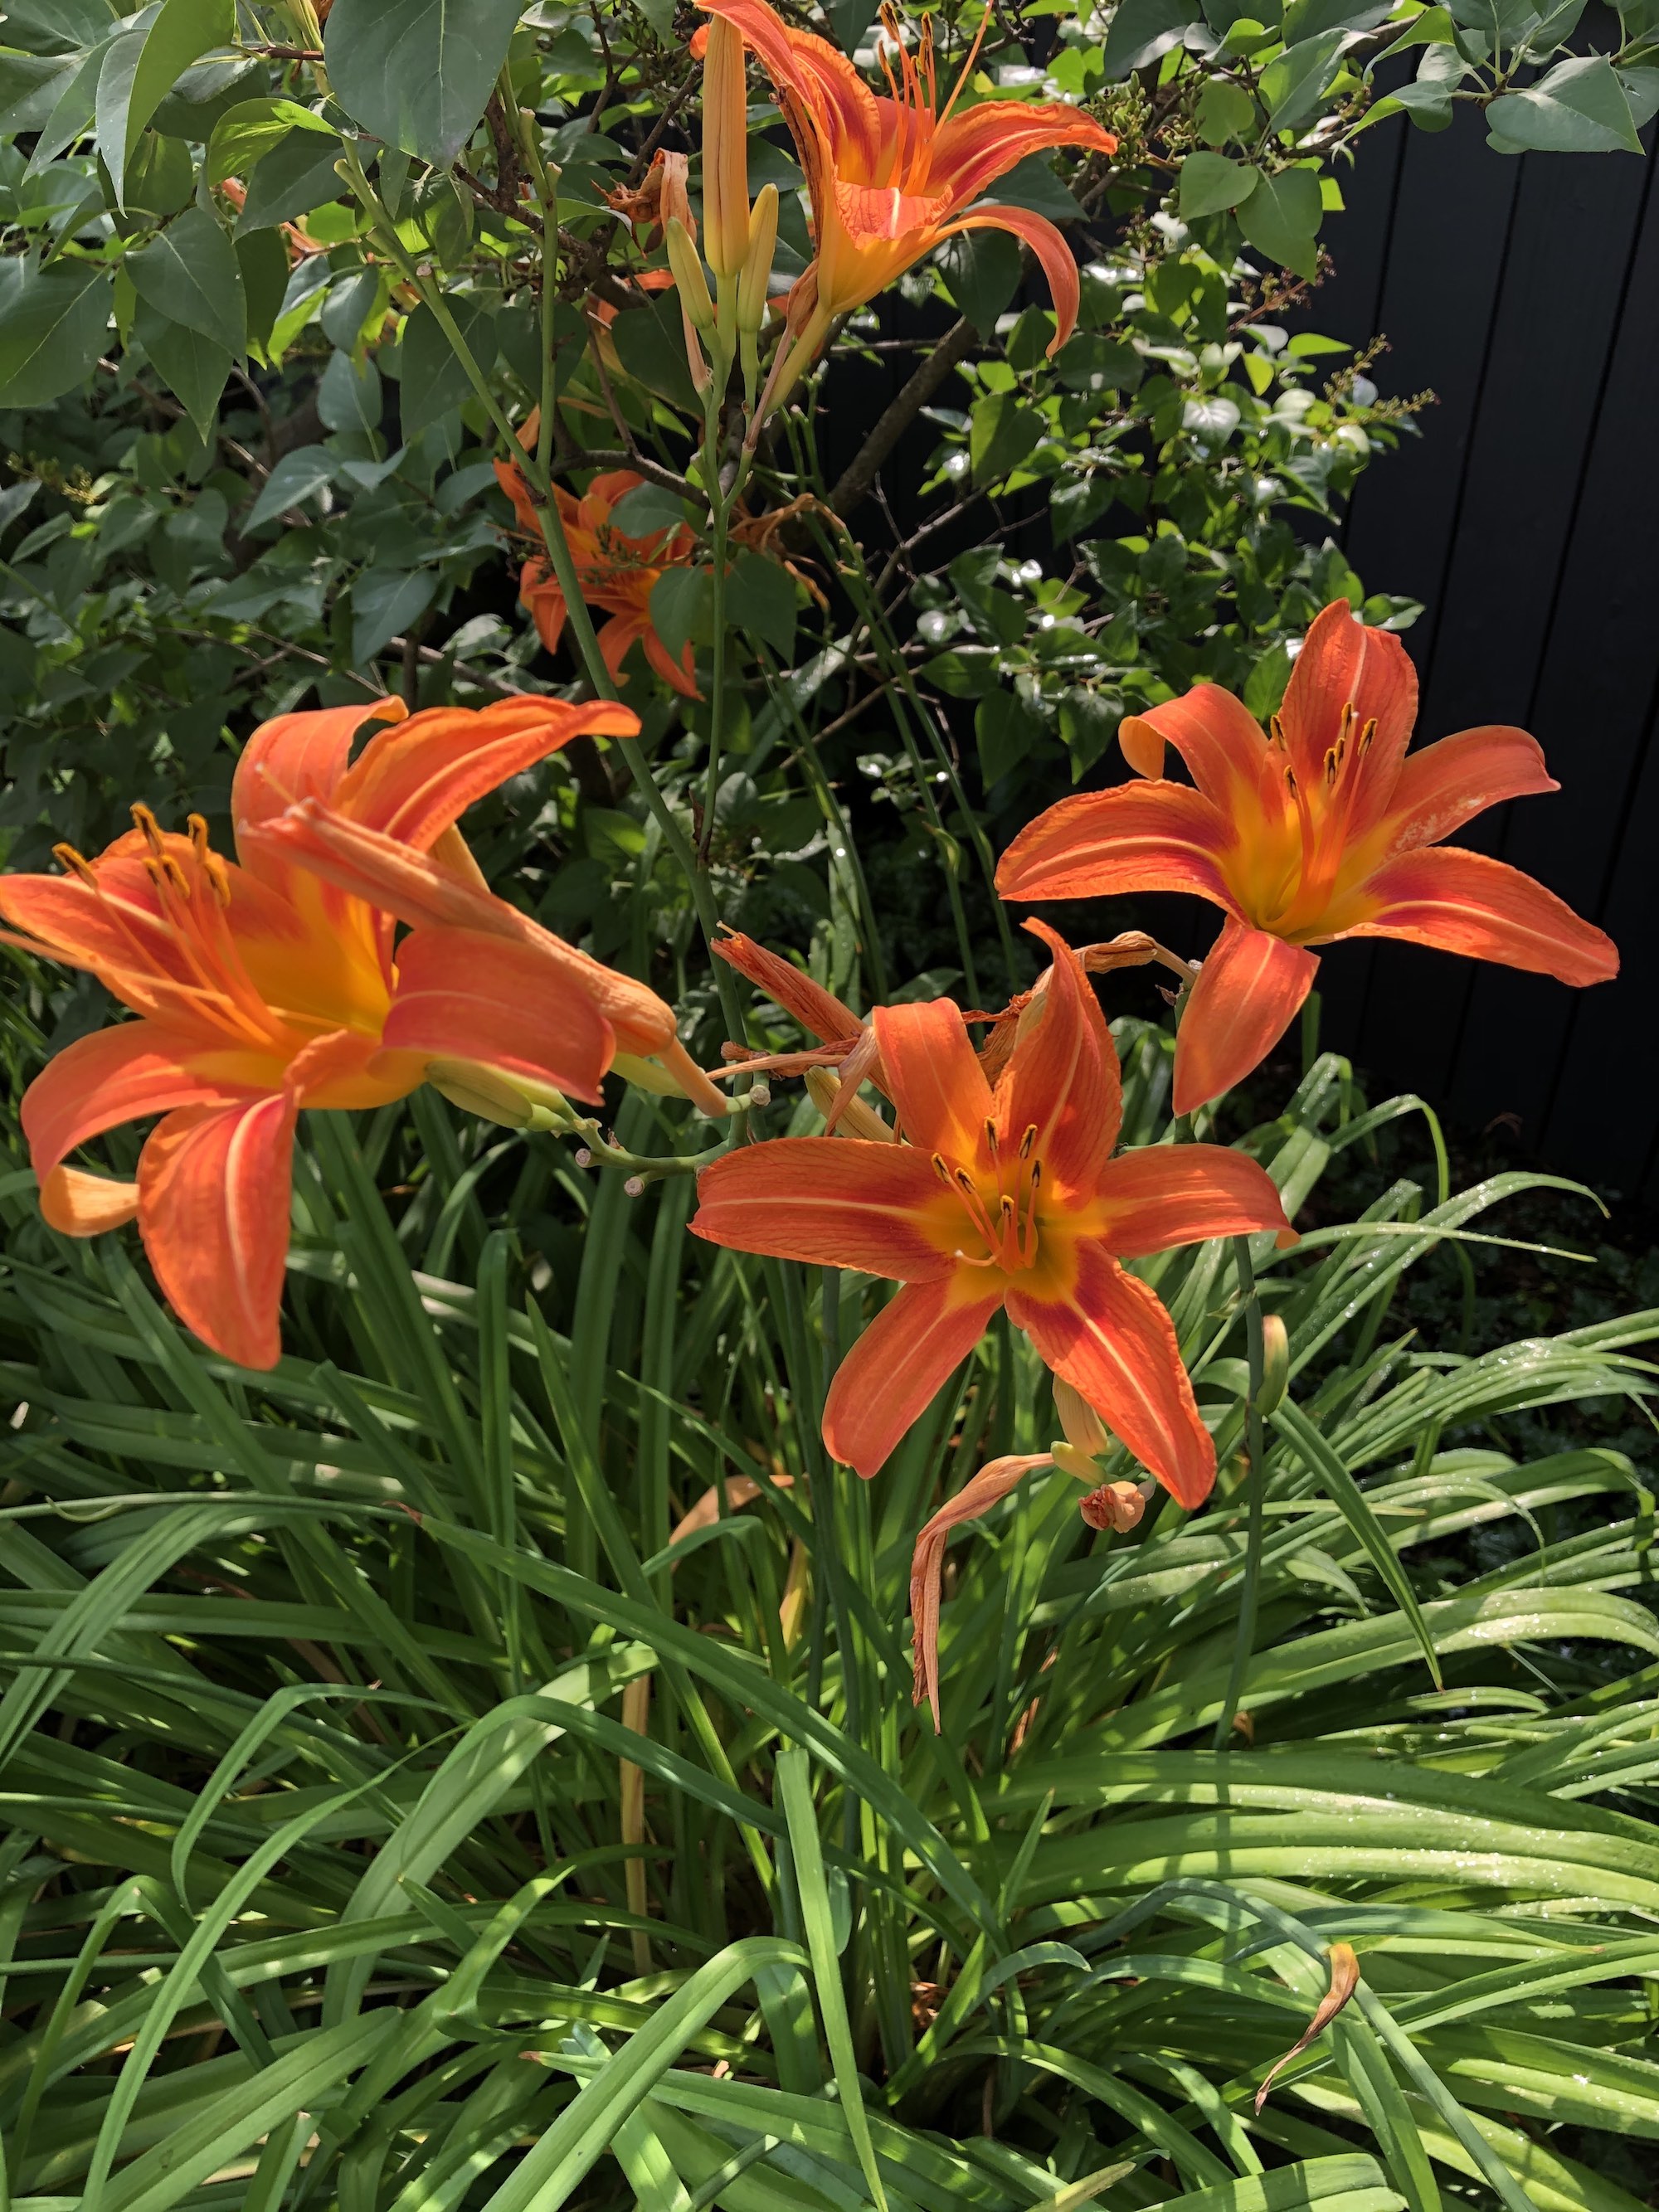 Orange Day Lily in Nakoma yard in Madison, Wisconsin on July 9, 2020.